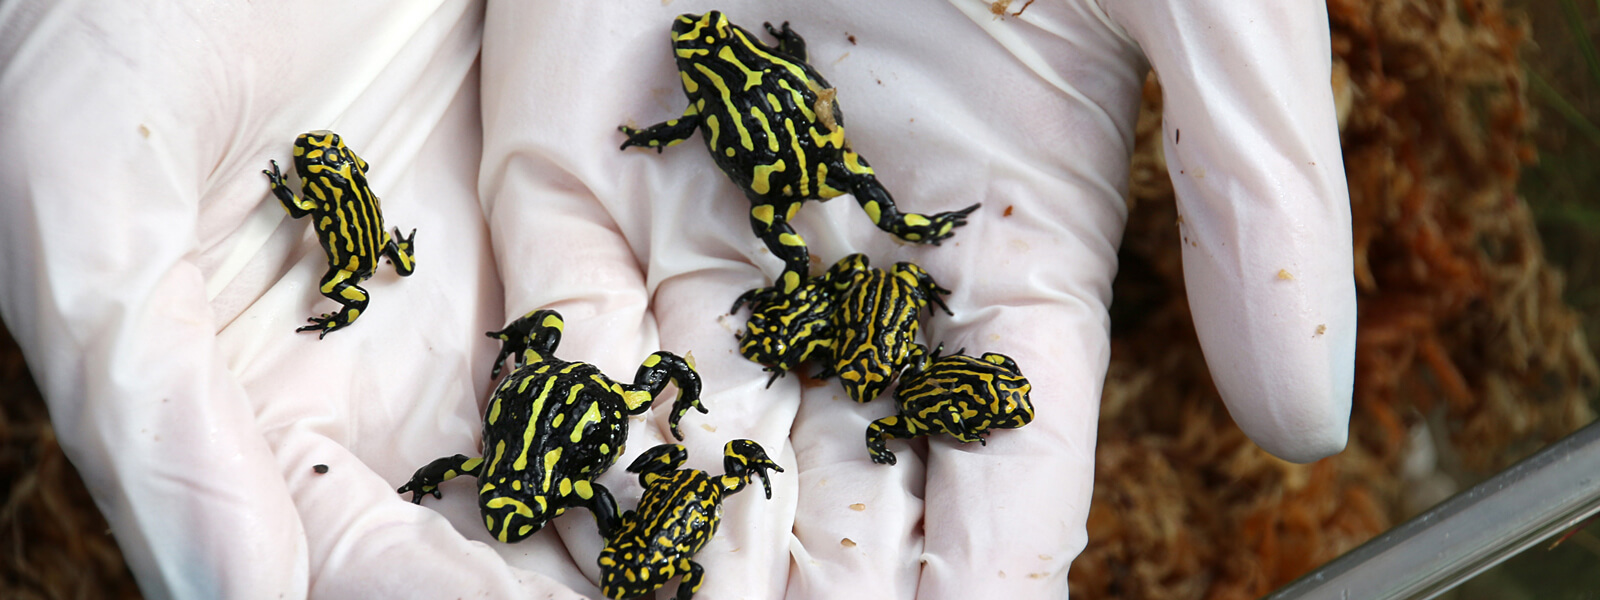 Six New Miniature Frog Species Discovered in Mexico, Smart News